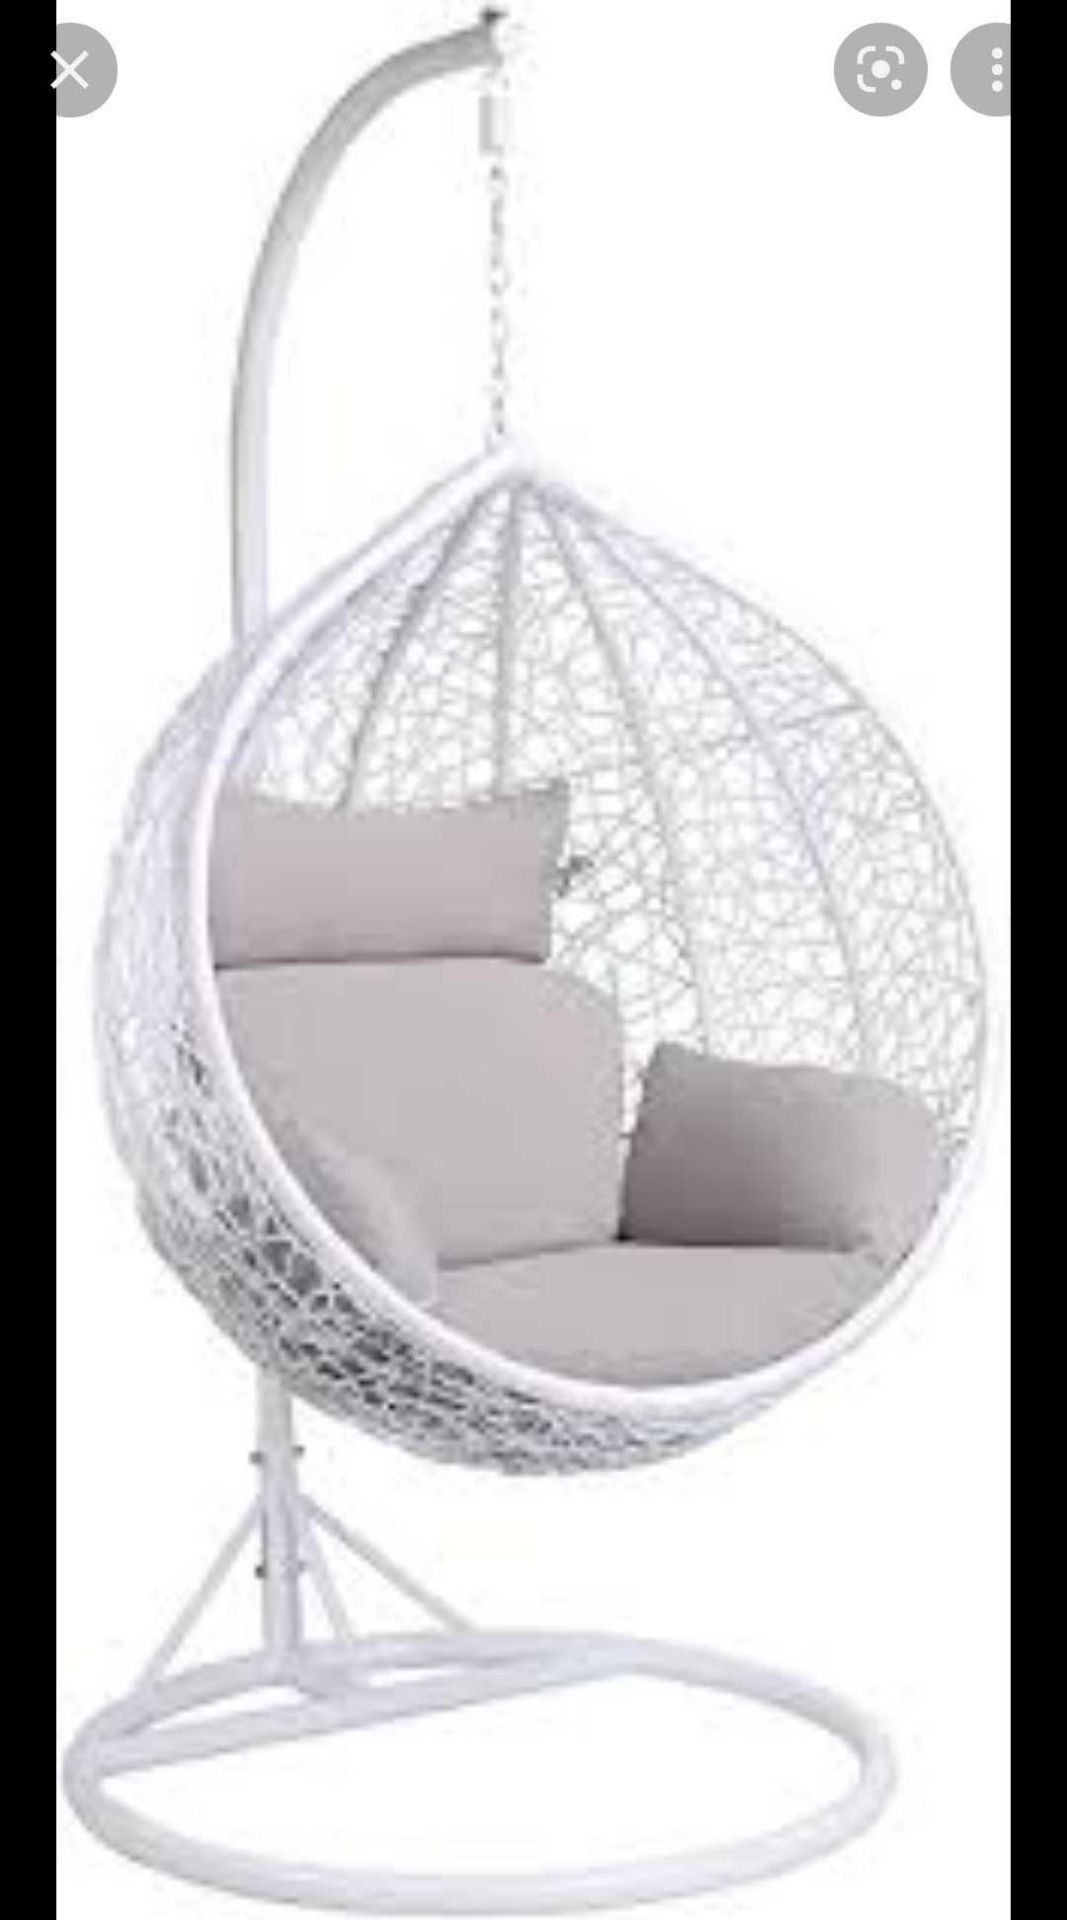 RRP £470 Boxed Patio Wicker Egg Chair In White